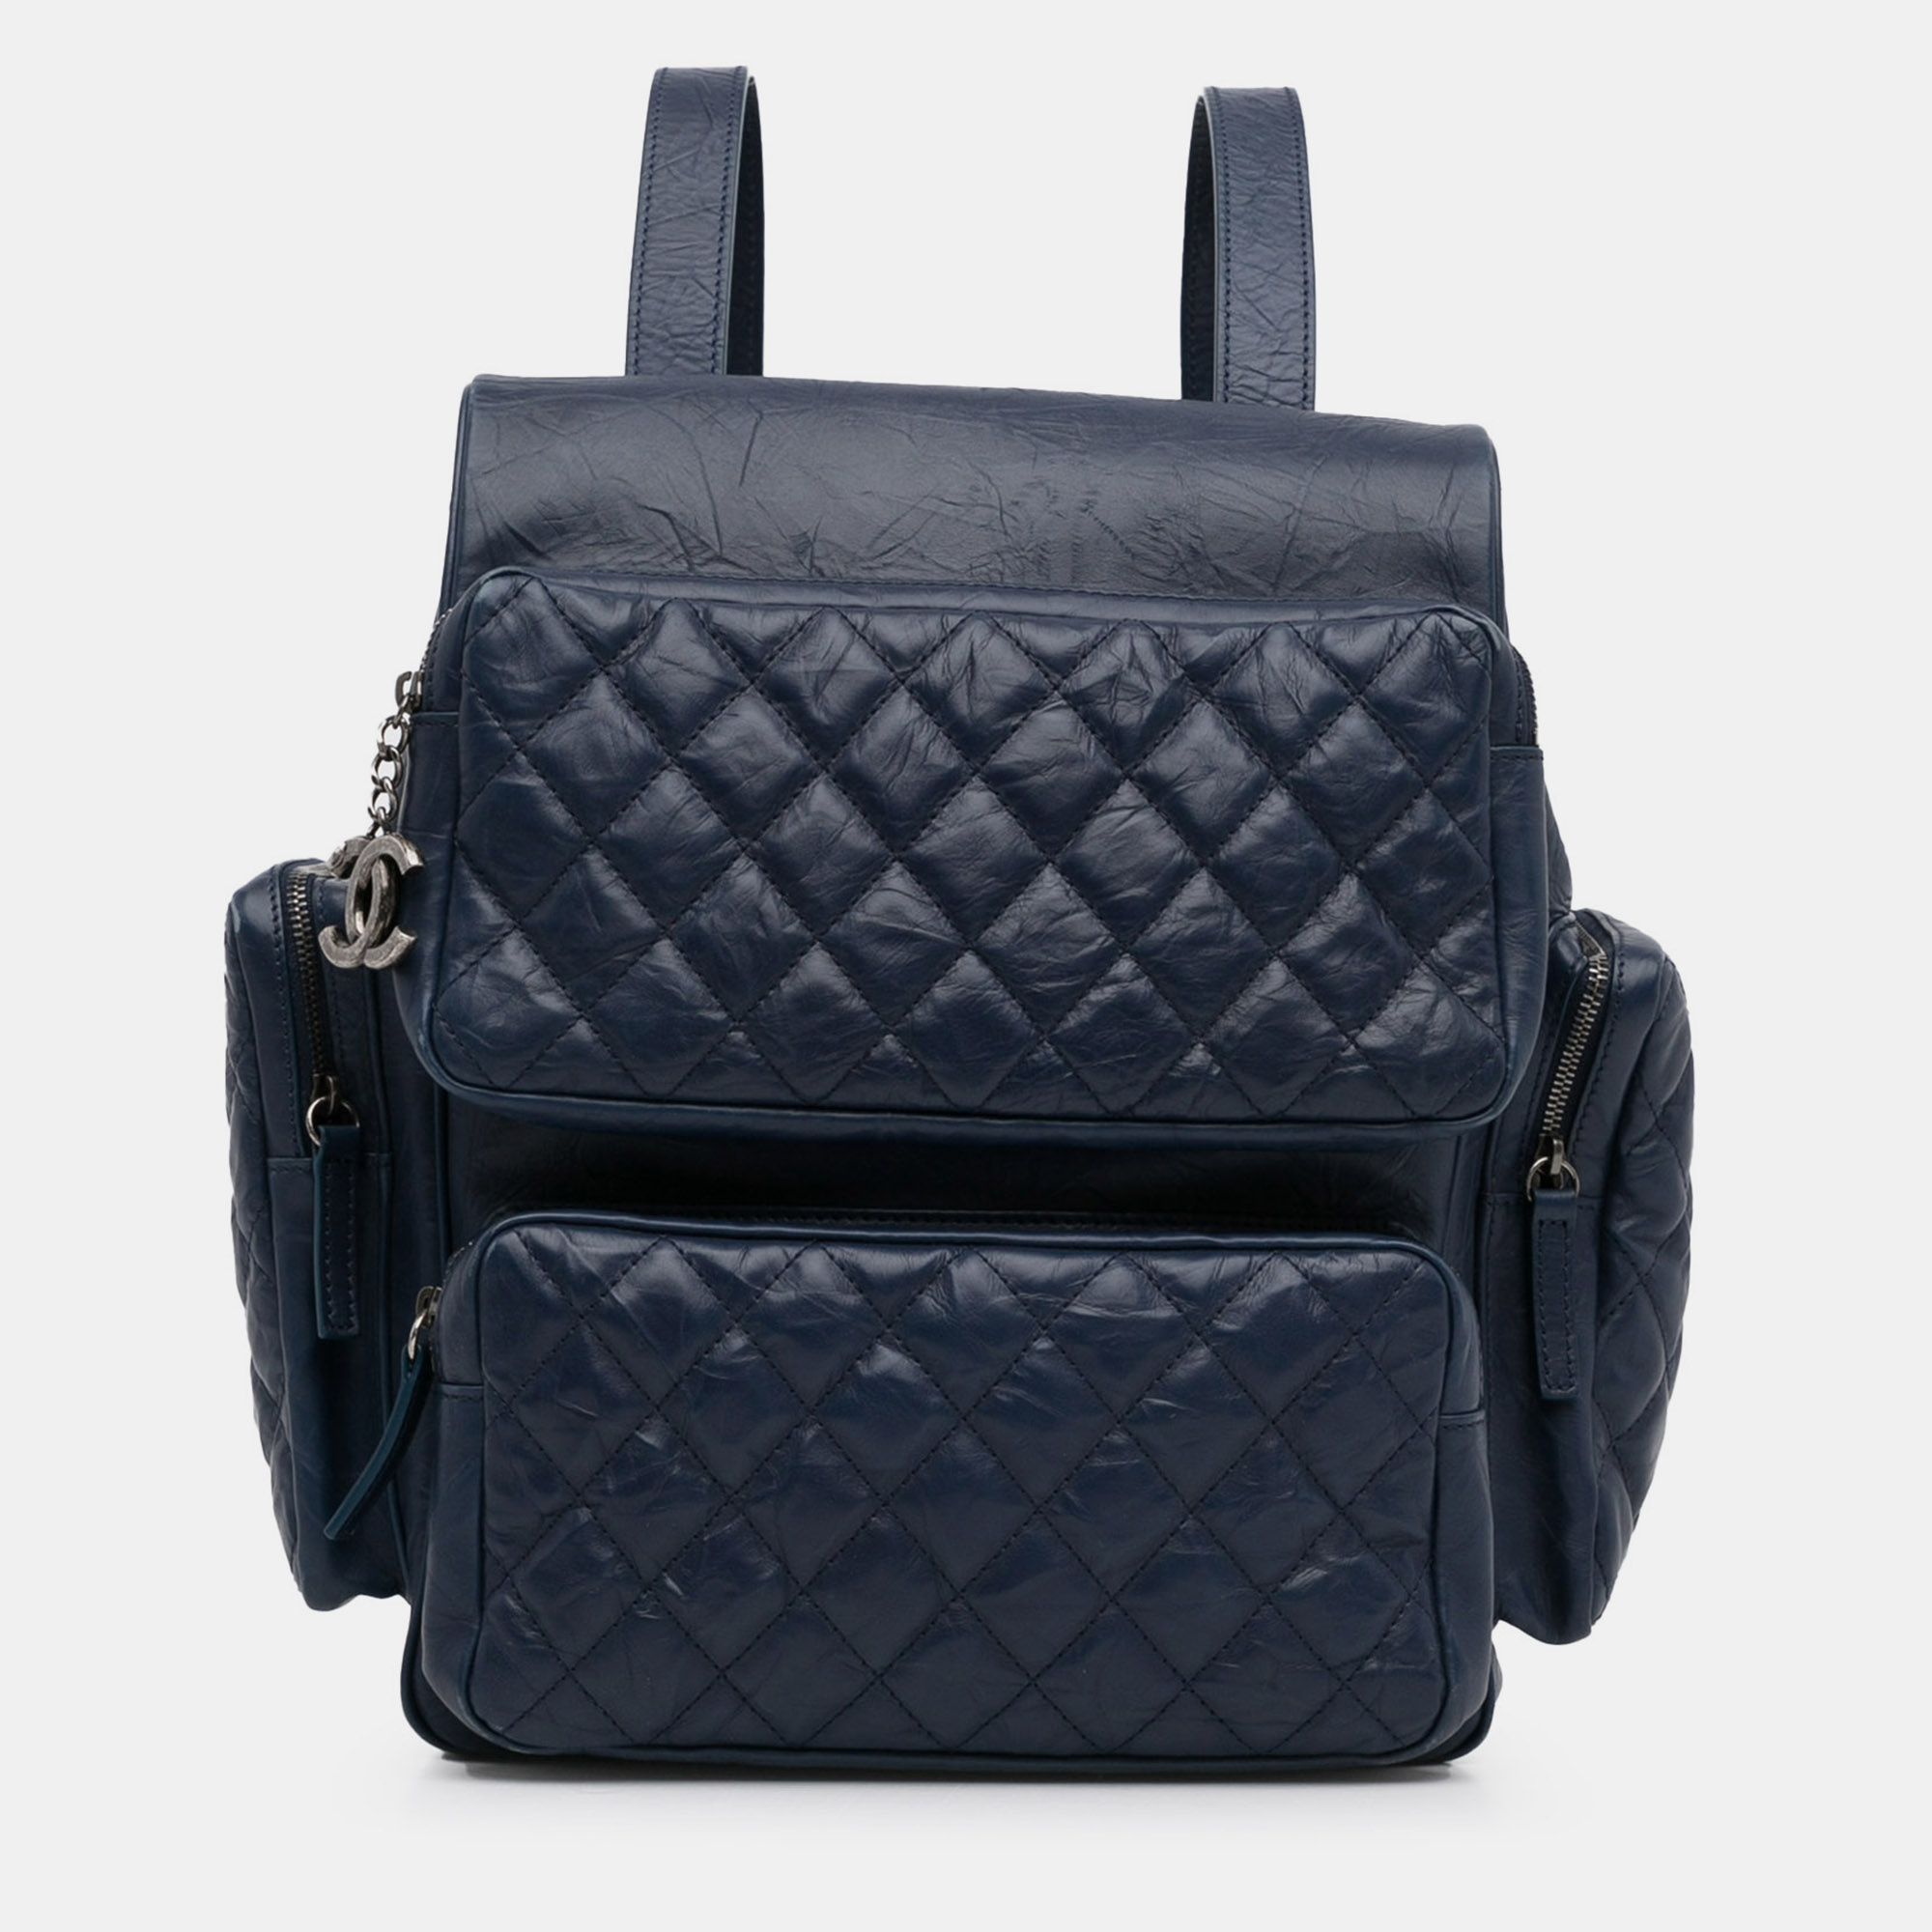 Chanel airlines casual rock backpack